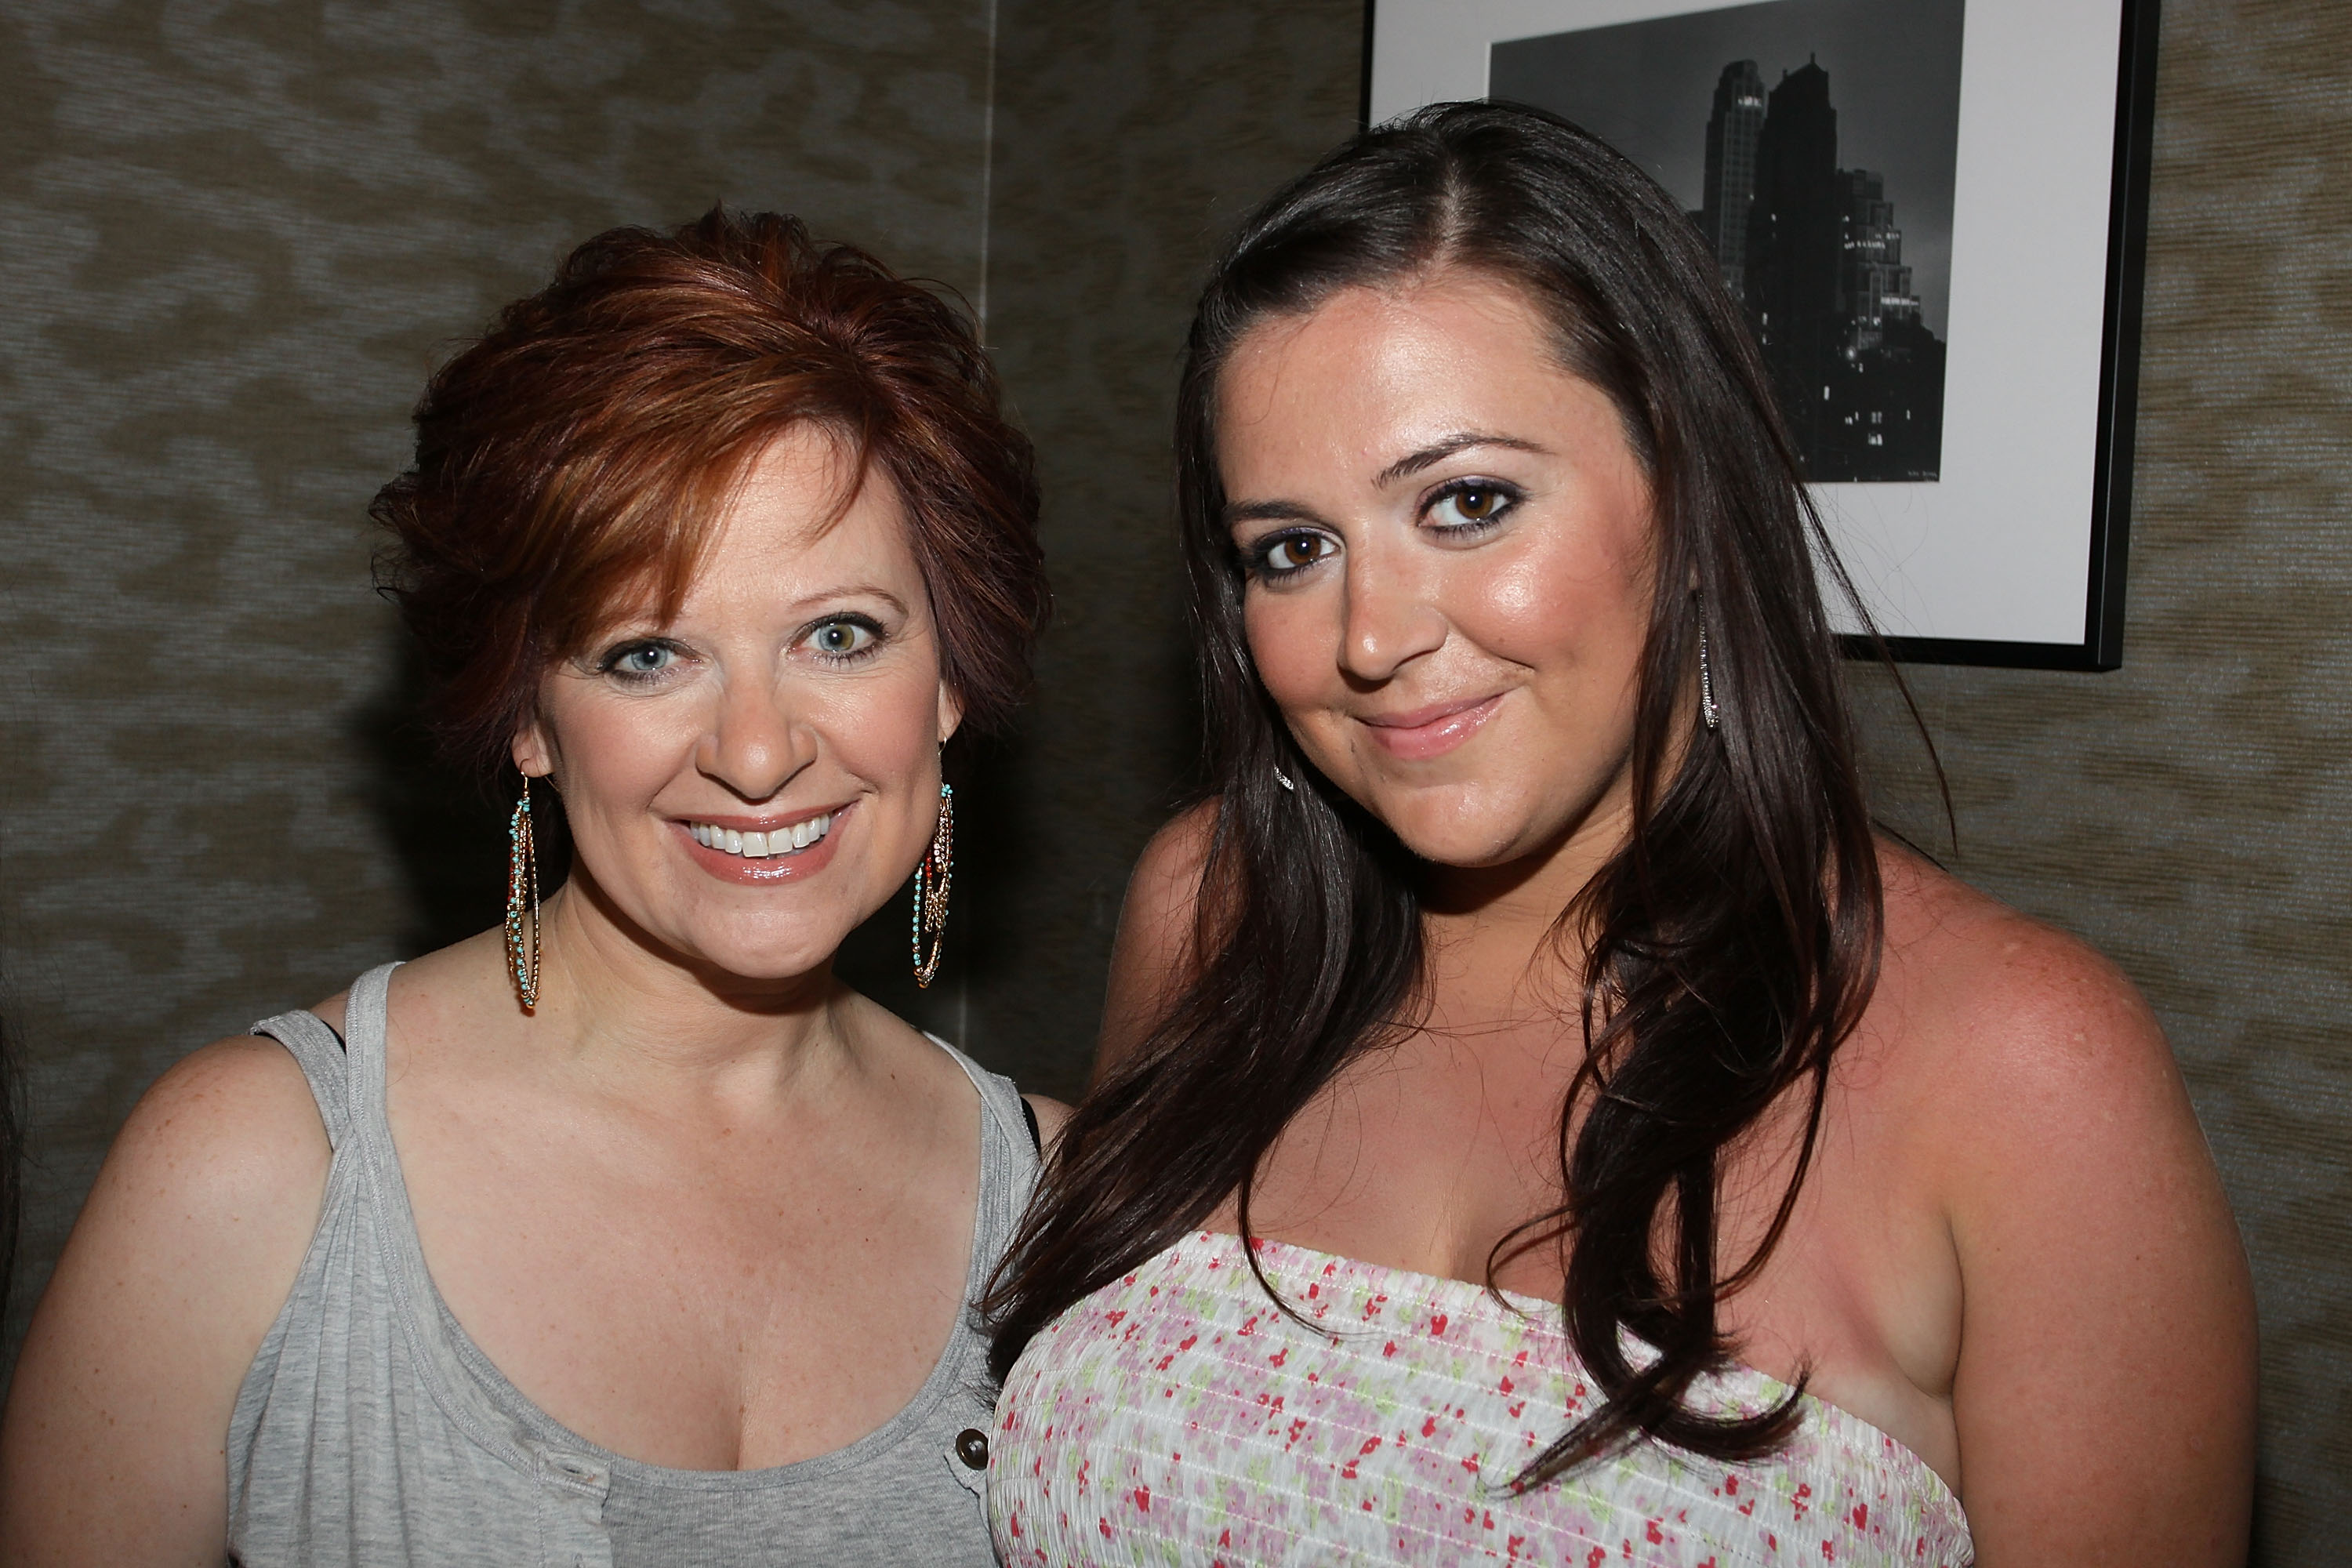 Lauren, 35, seen here with mom Caroline Manzo in 2010, opened up about her weight loss journey last year